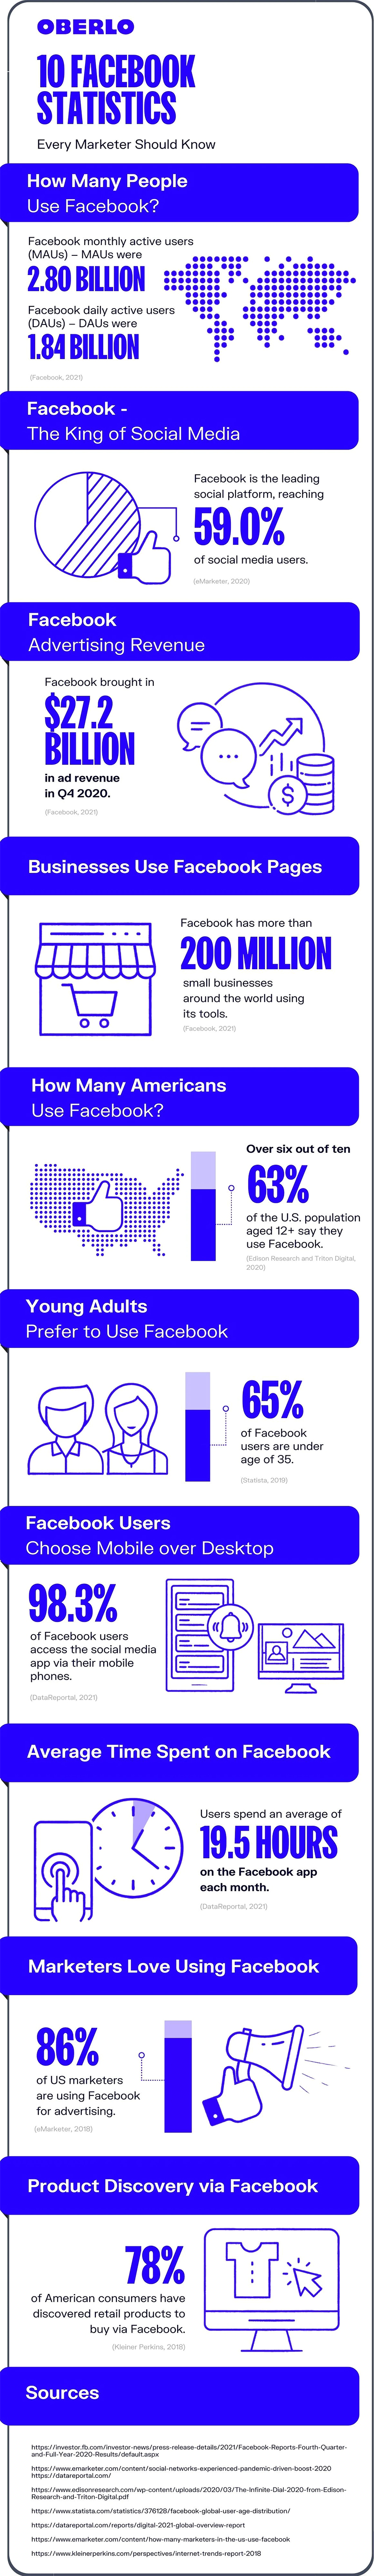 10 facebook statistics every business owner marketer should know in 2021 infographic